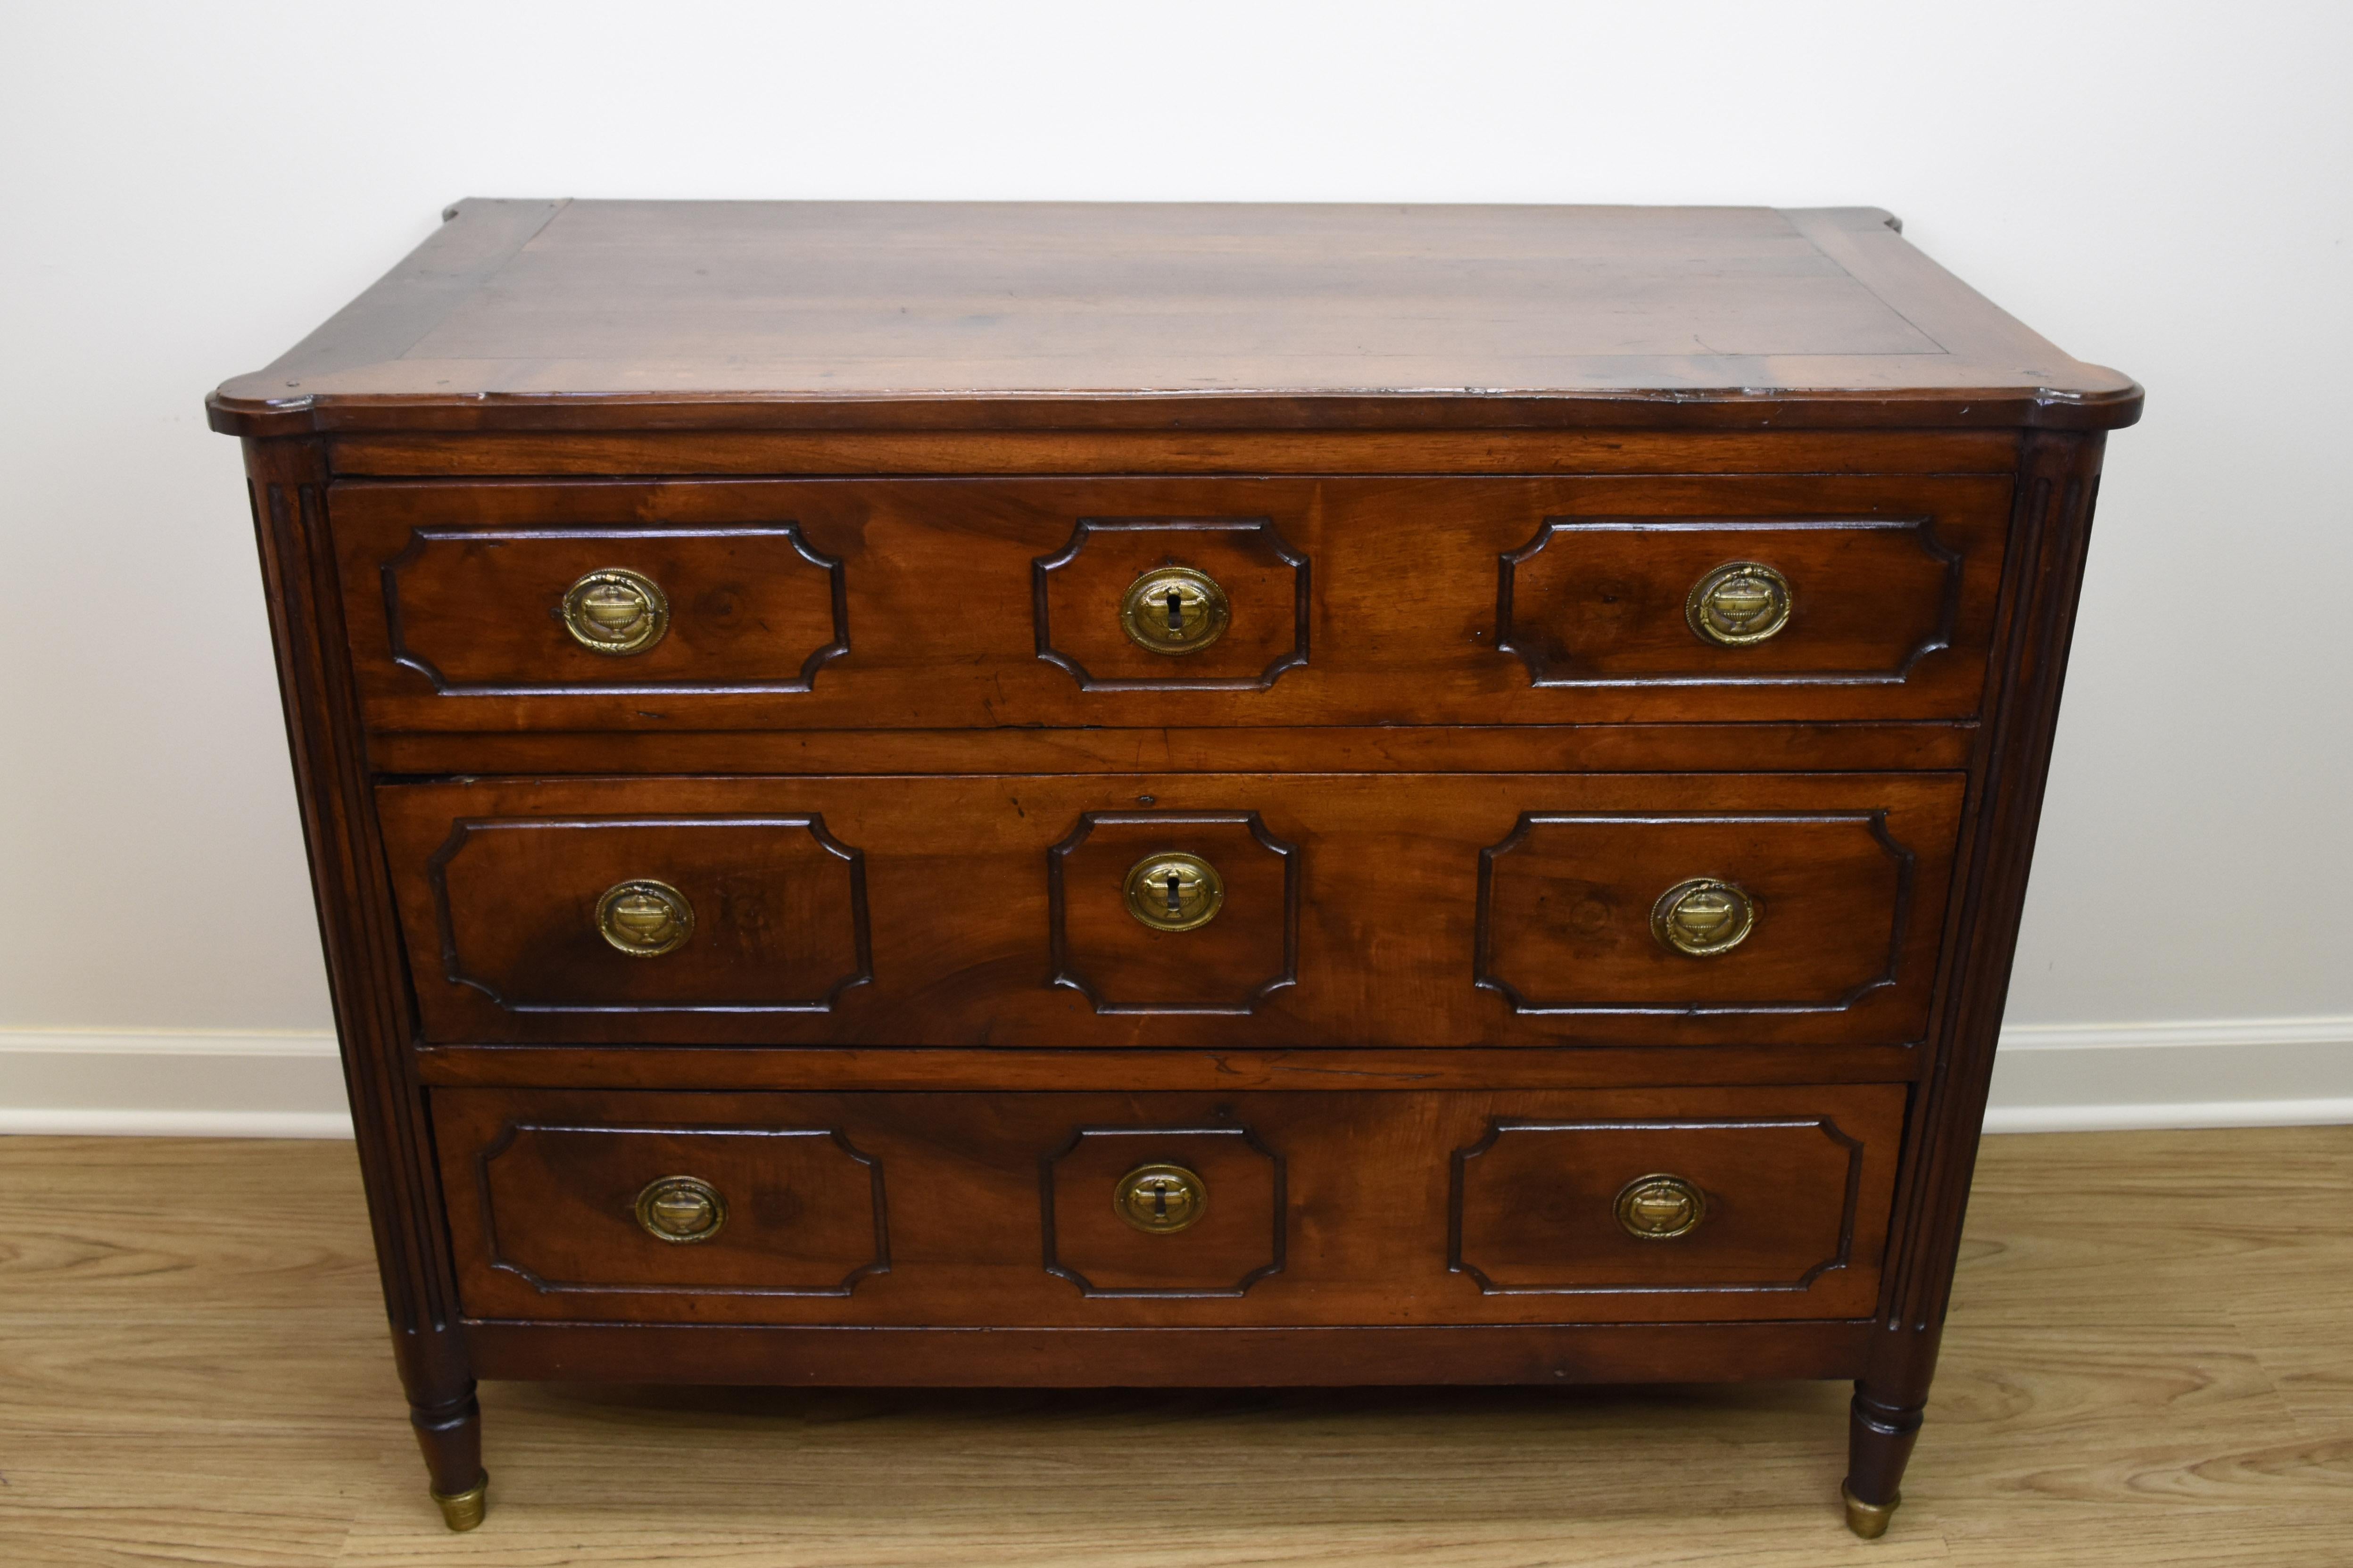 This exquisite 19th century French walnut commode is in the Louis XVI style and features three working drawers. Each drawer has the original bronze hardware and unique geometric hand carving. The drawers are expertly lined with burlap. The legs are